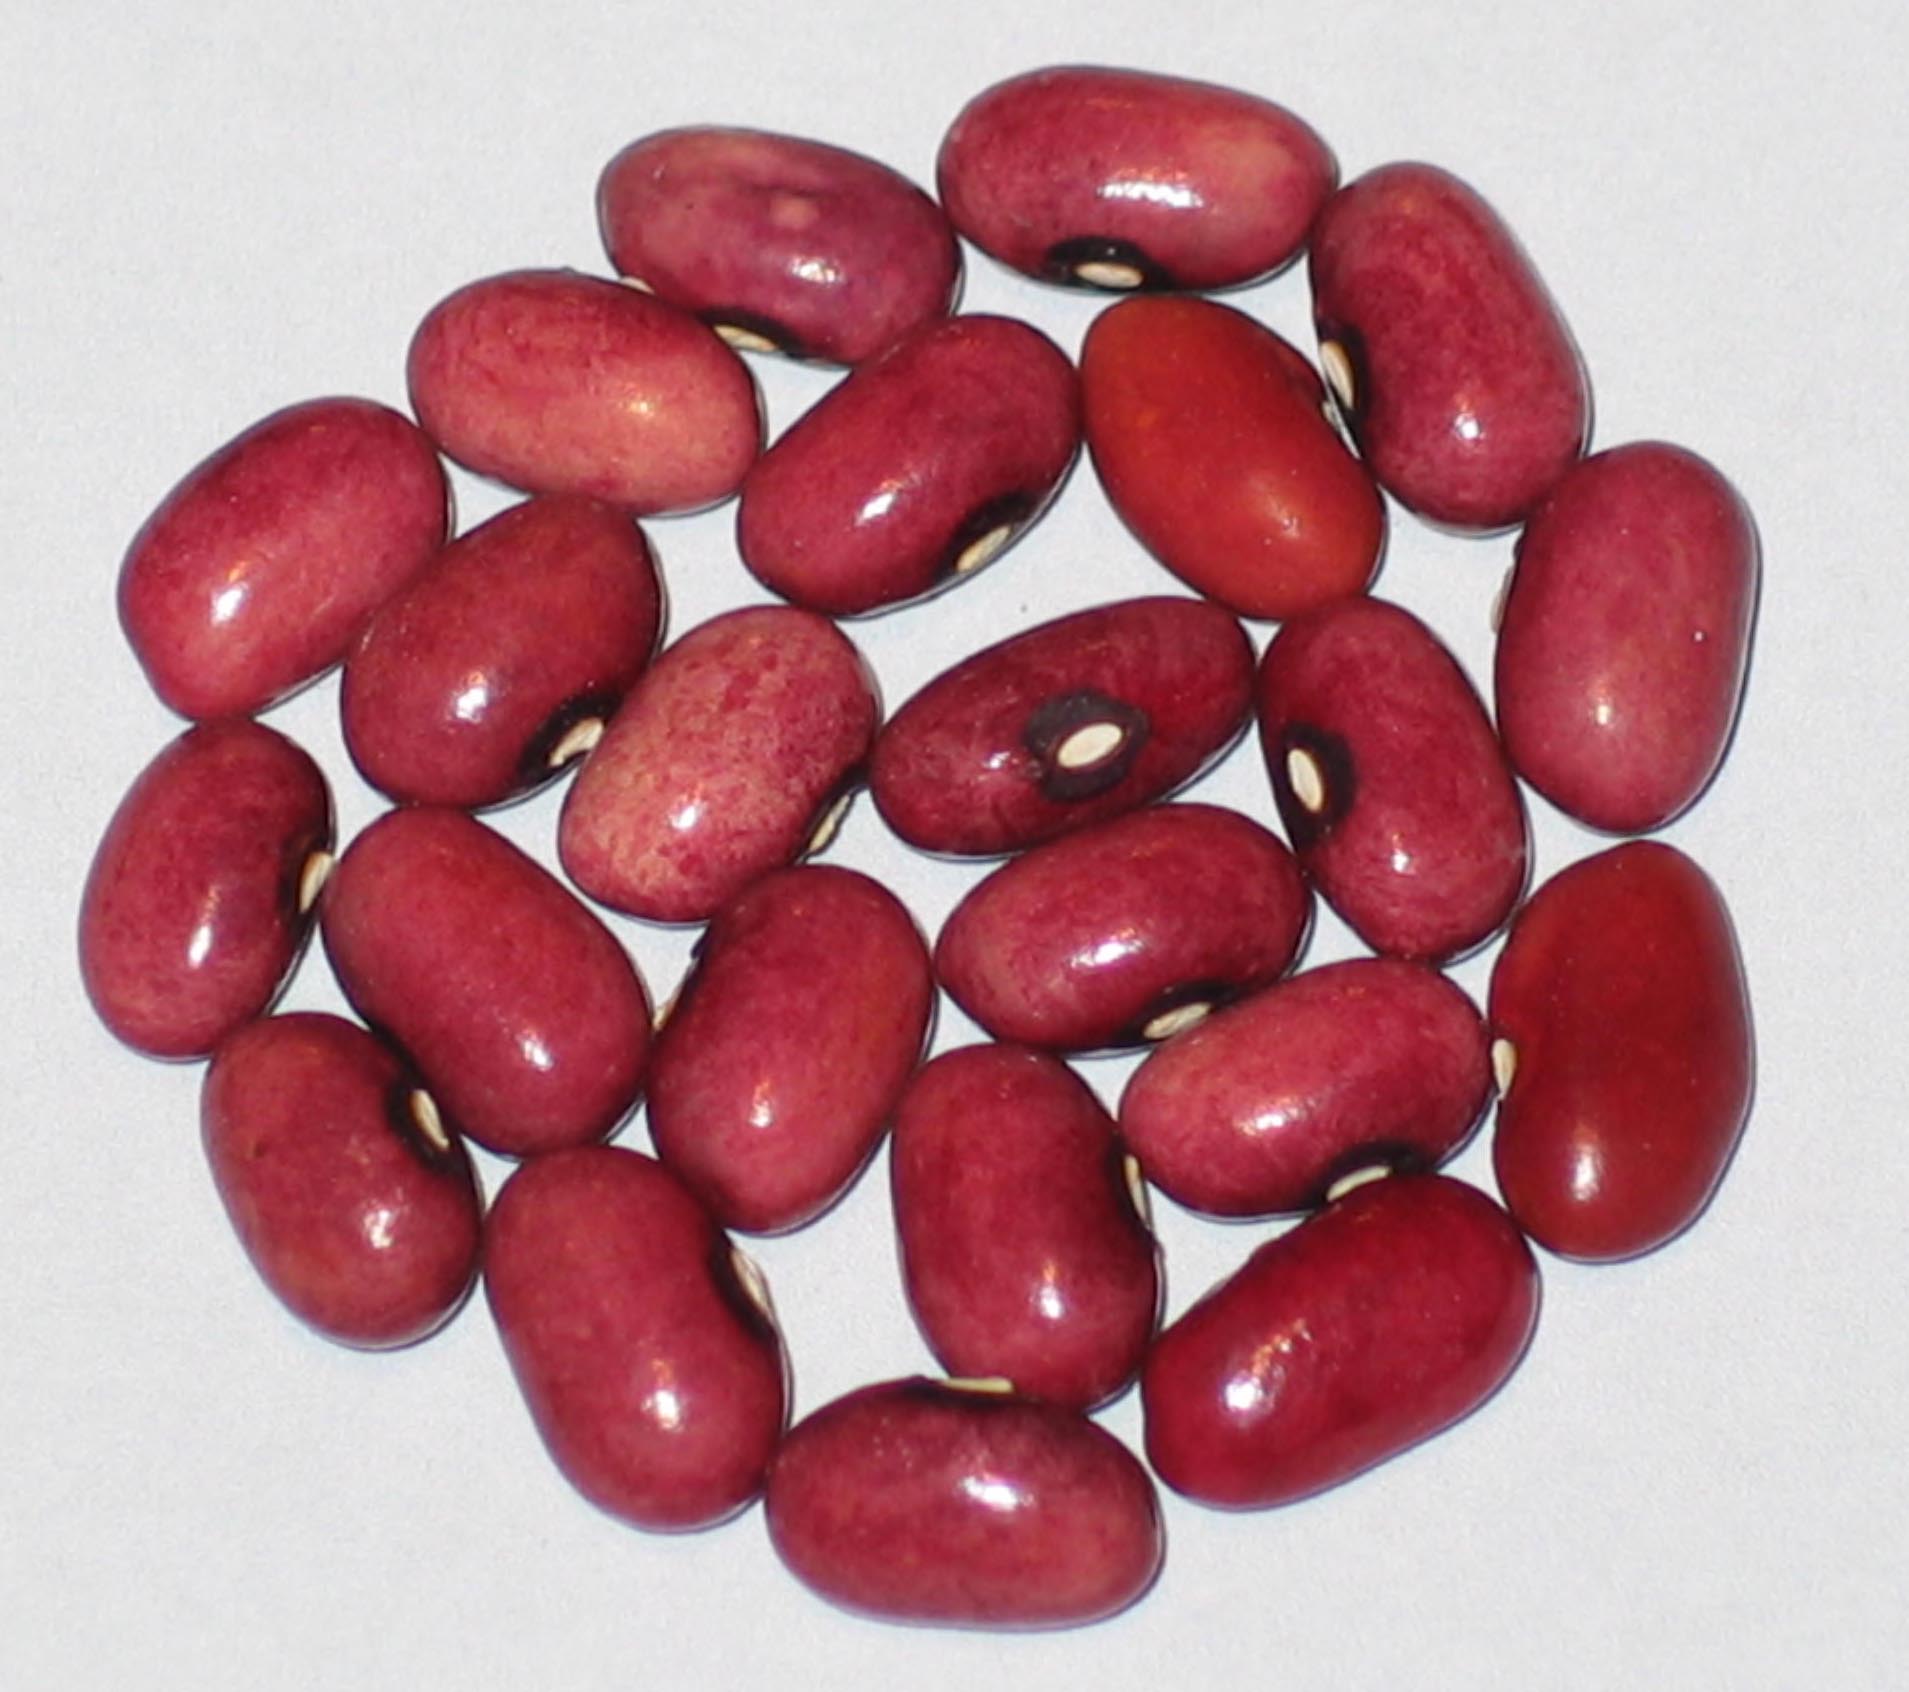 image of Muriel beans